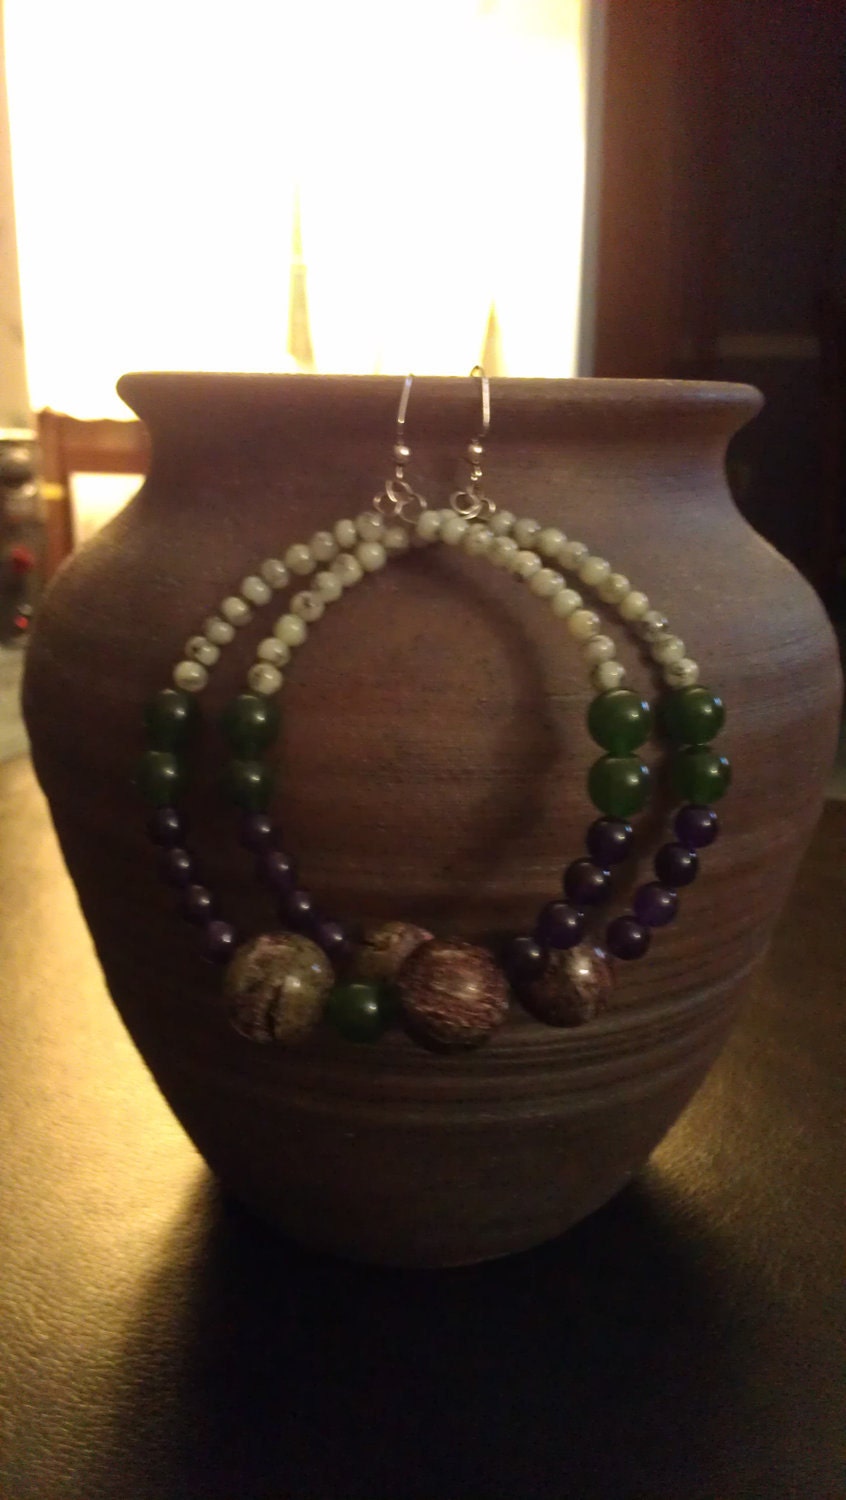 Ceramic and Glass Beaded Hoop Earrings with Purple, Green, and Multi Beads: "Bowl of Grapes"